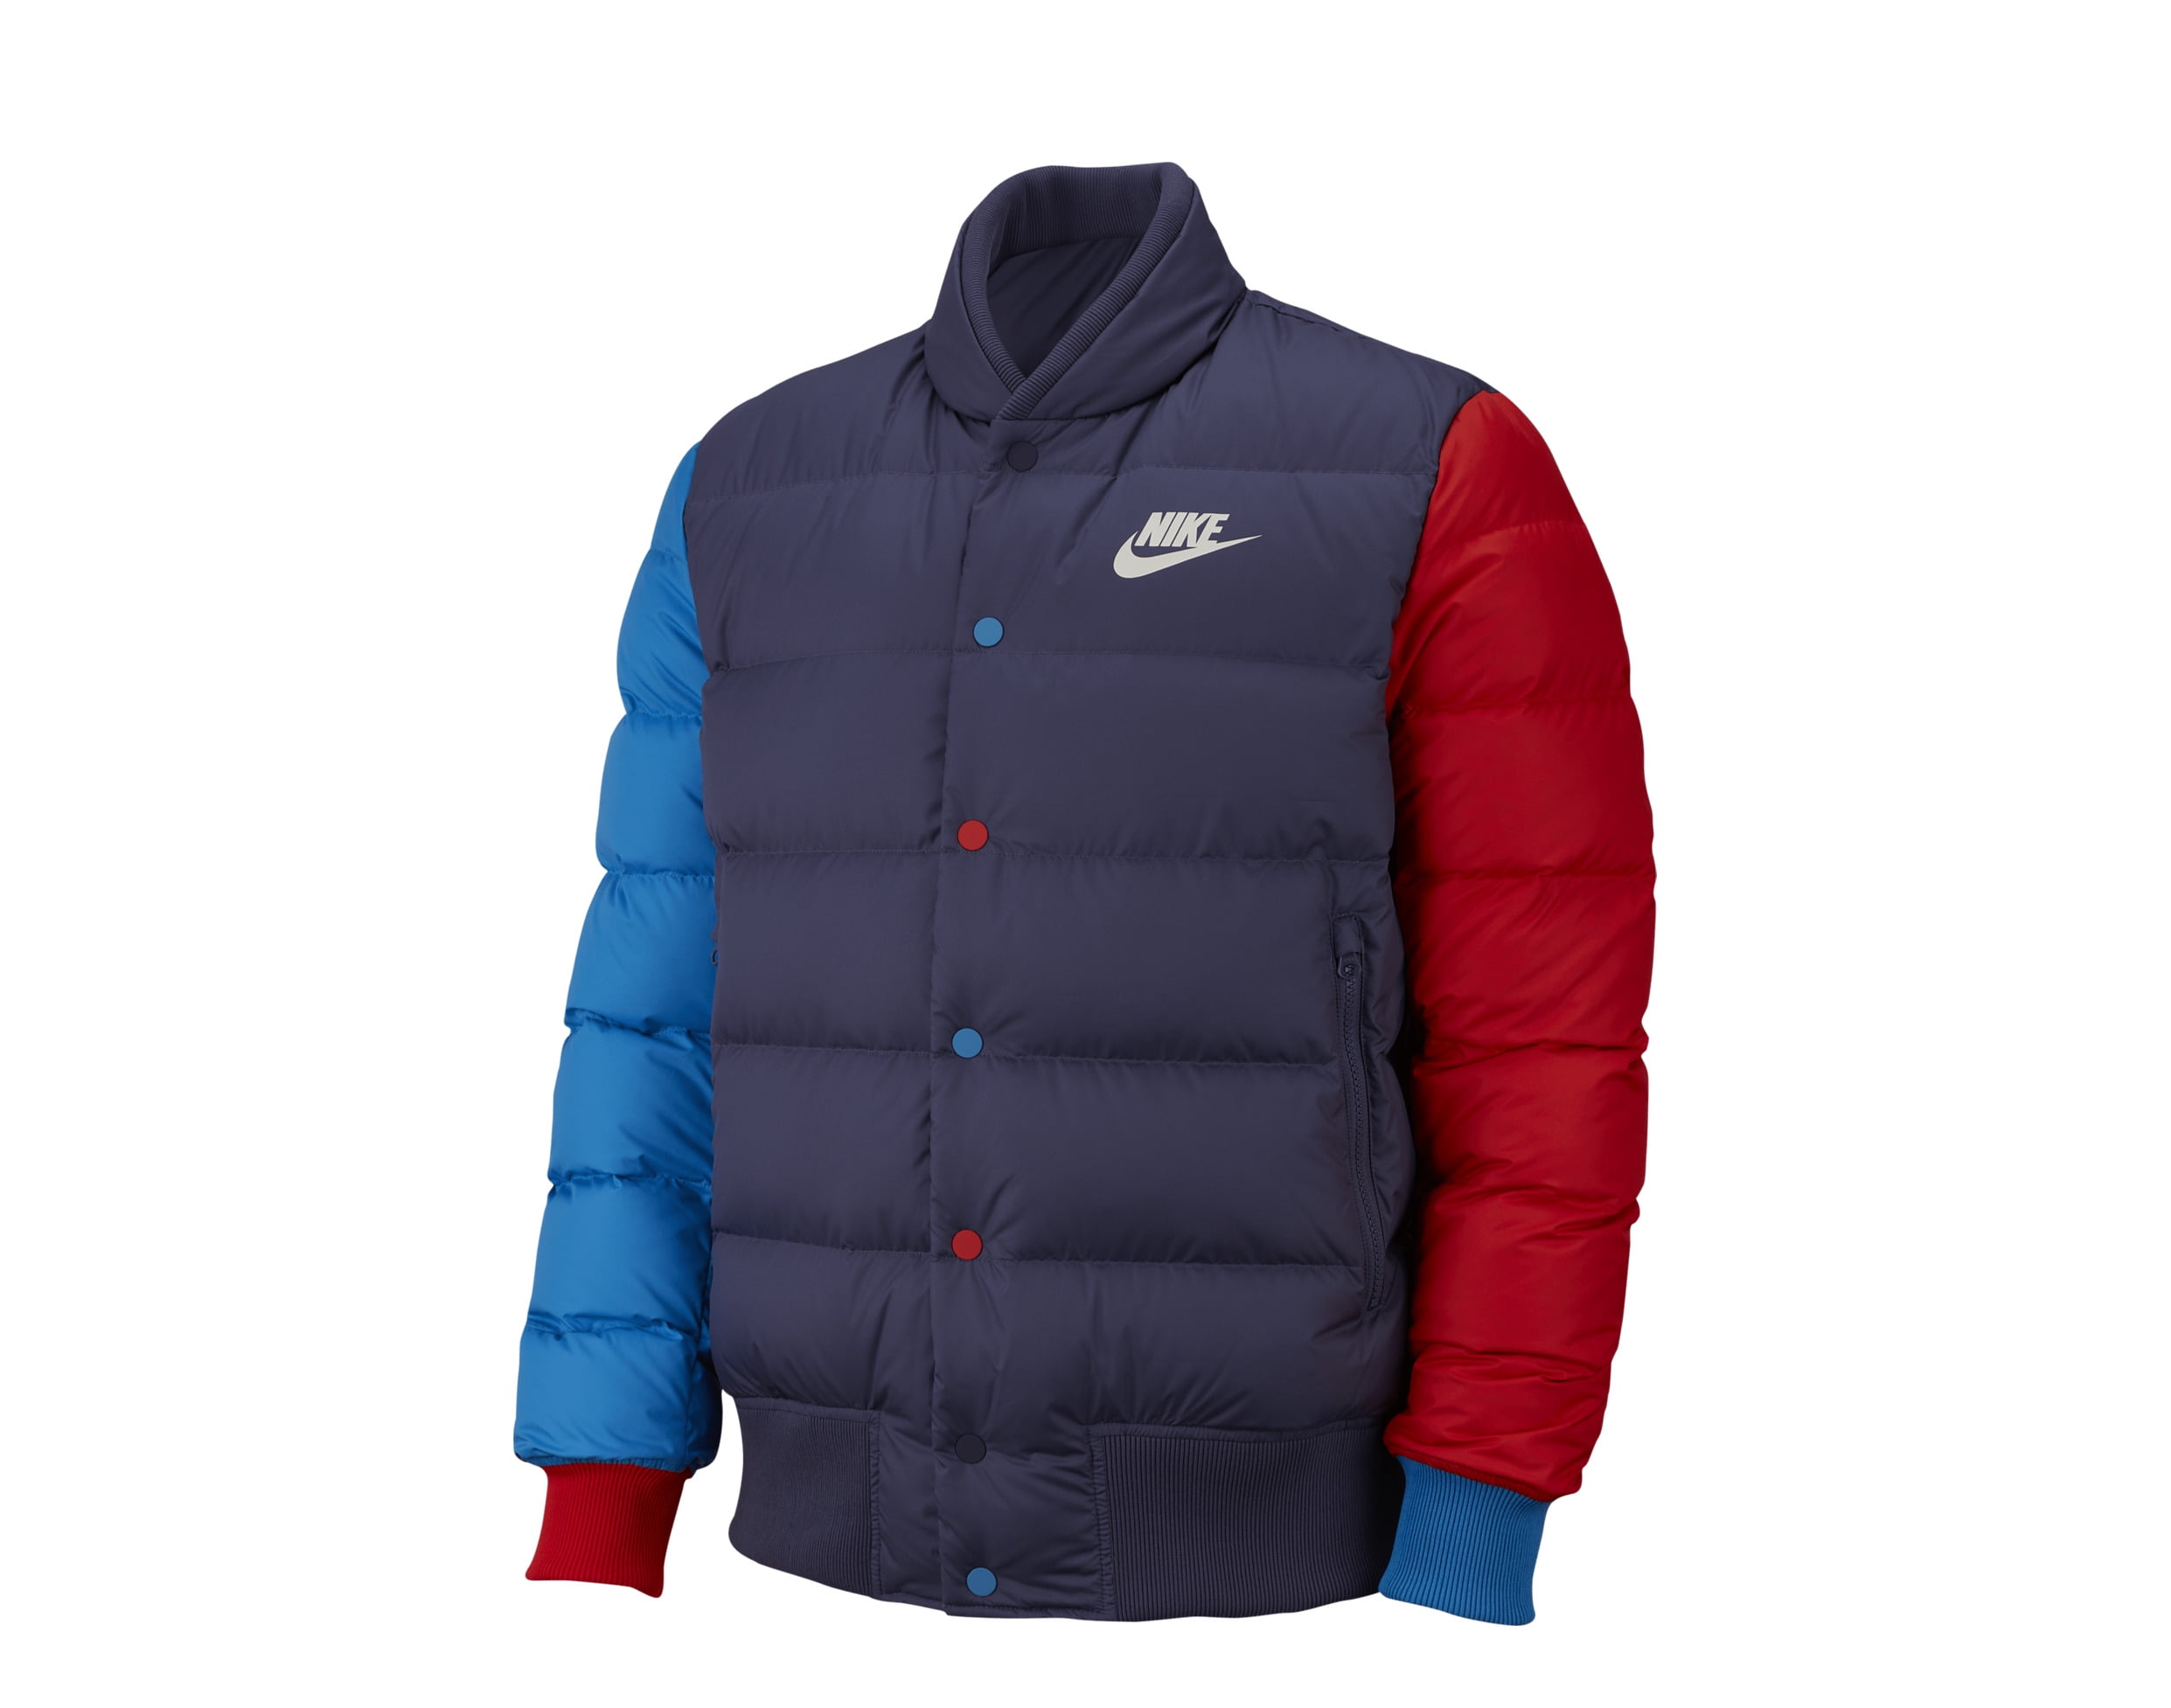 nike jacket red and blue